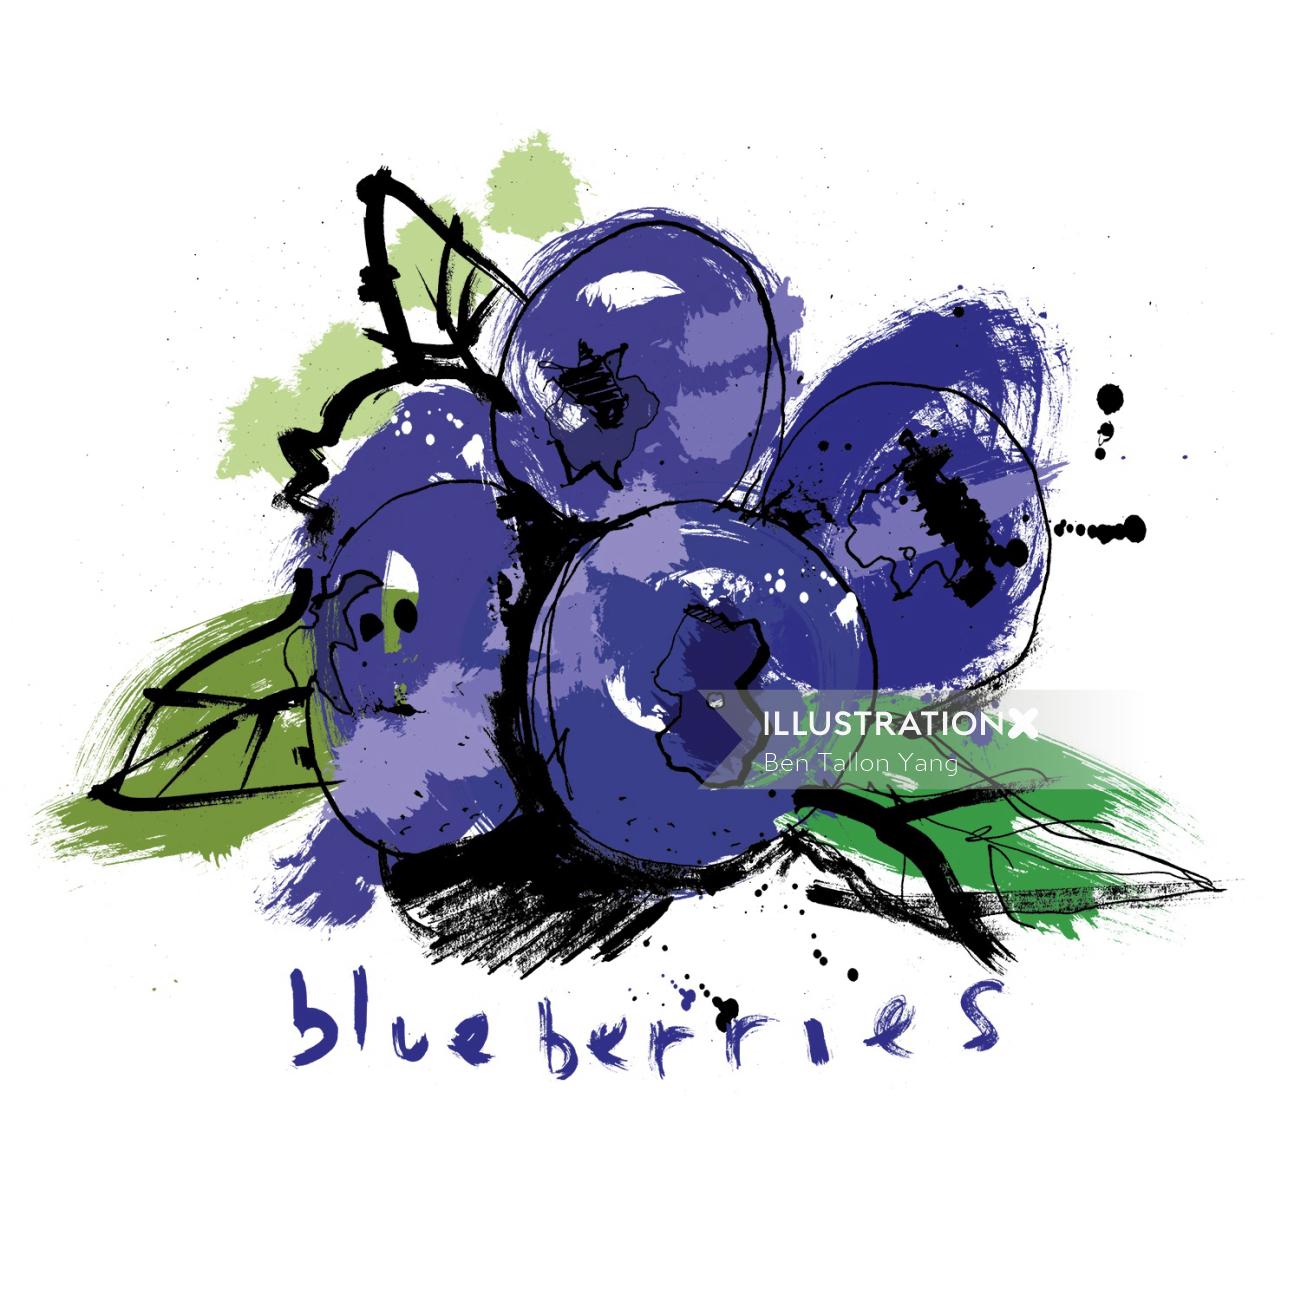 Watercolor drawing of Blueberries